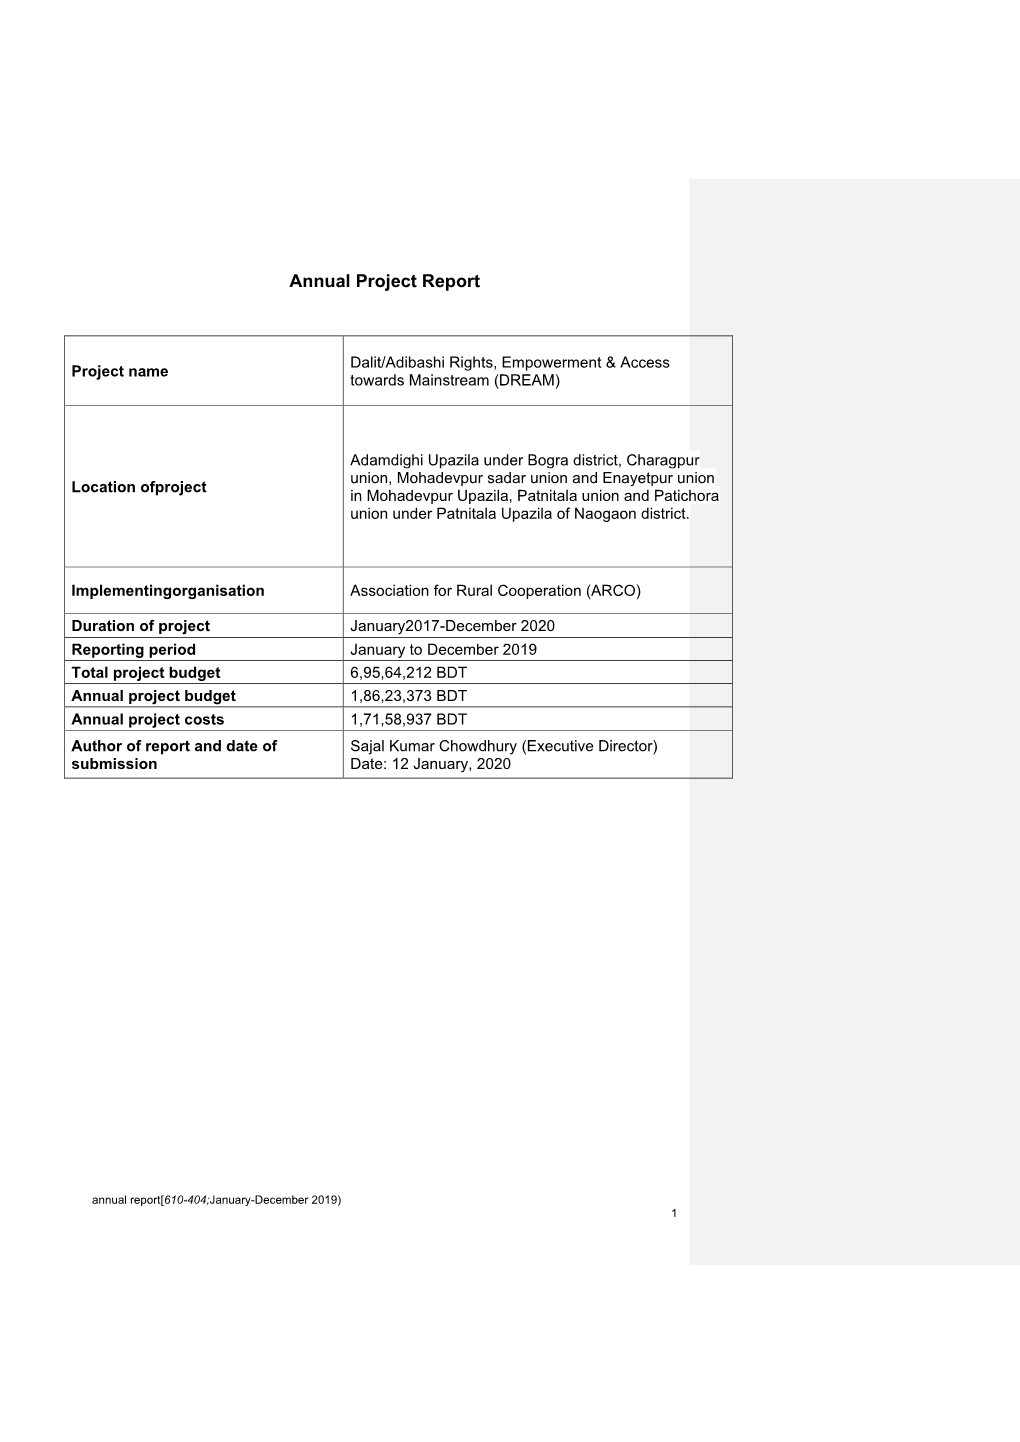 Annual Project Report